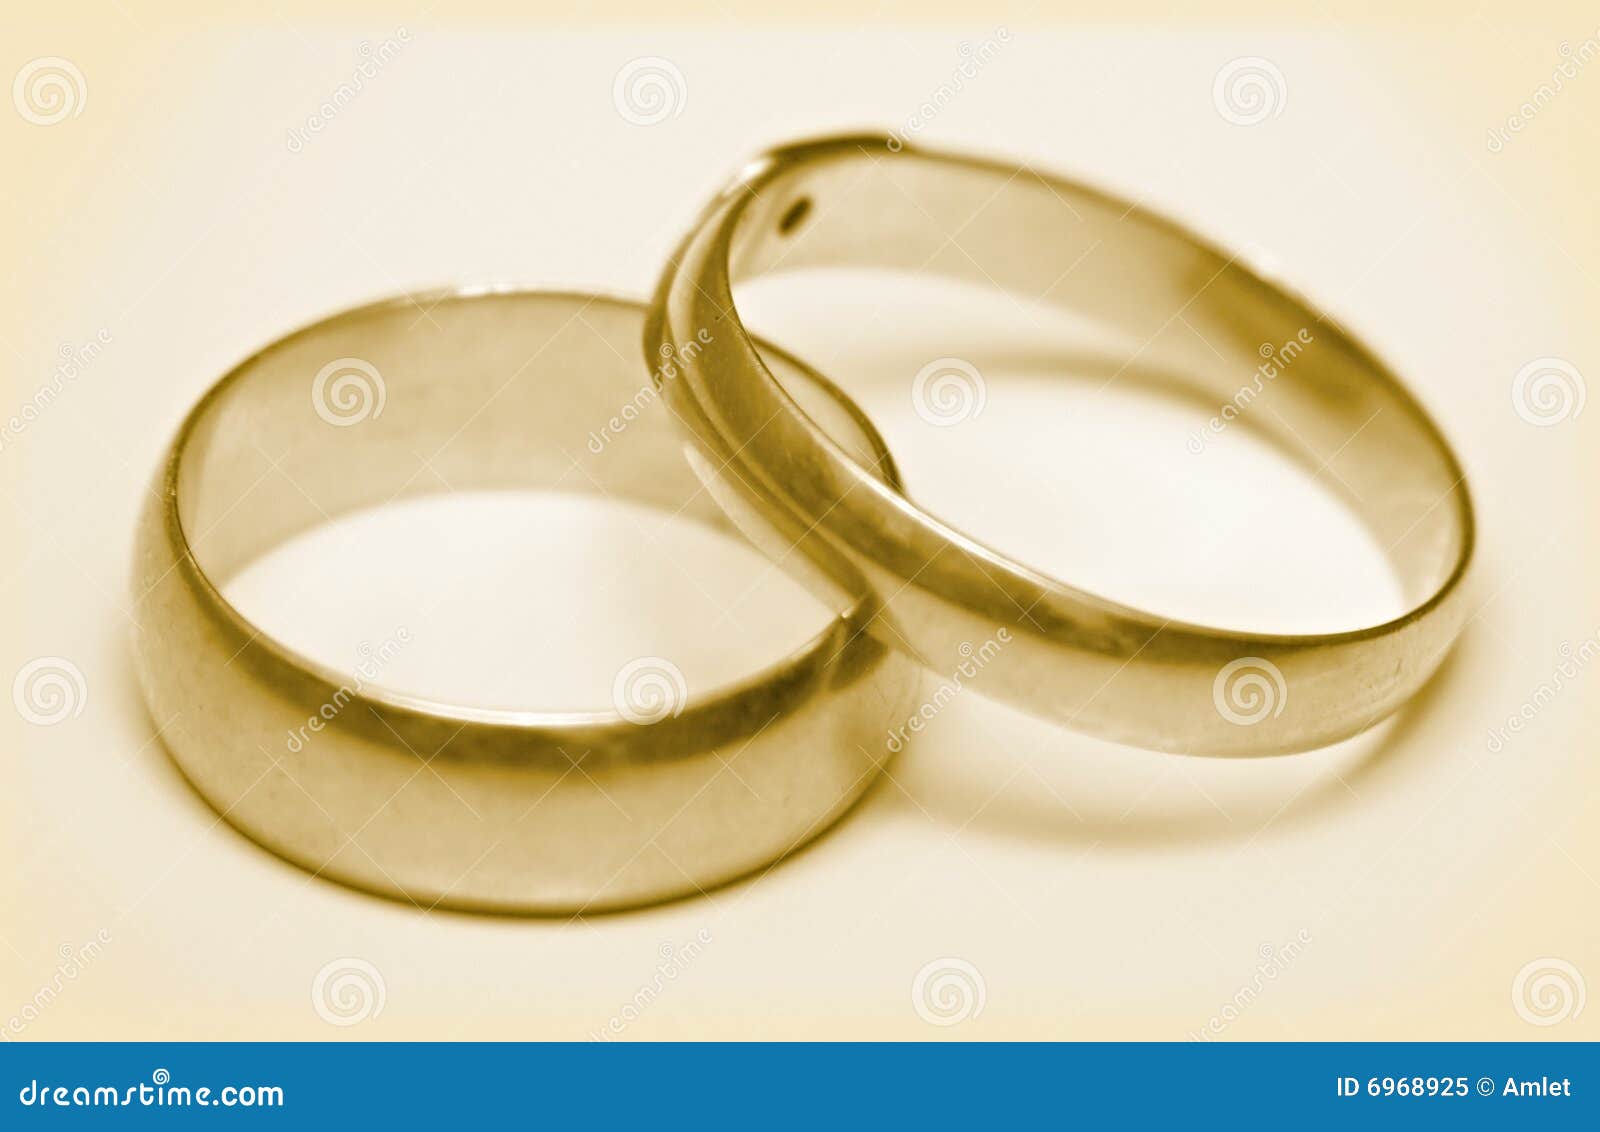 Pair wedding rings. The traditional attribute symbolizing registration ...